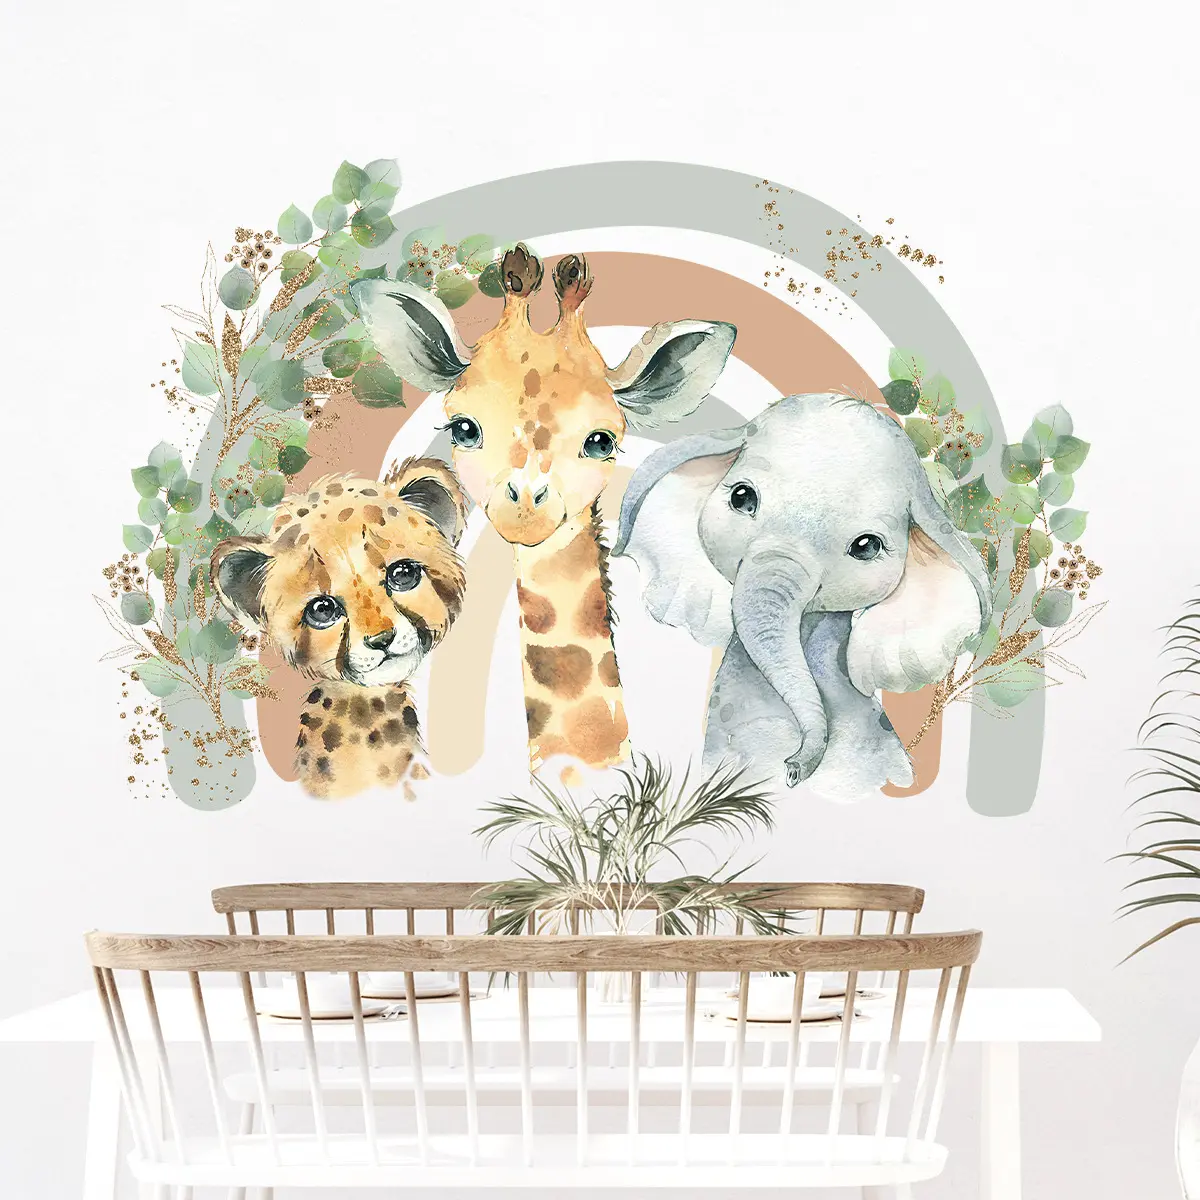 Custom Plant Wall Sticker Elephant Lion Giraffe Animals Wall Decals Eco-friendly for Children Room Easy Stick and Peel